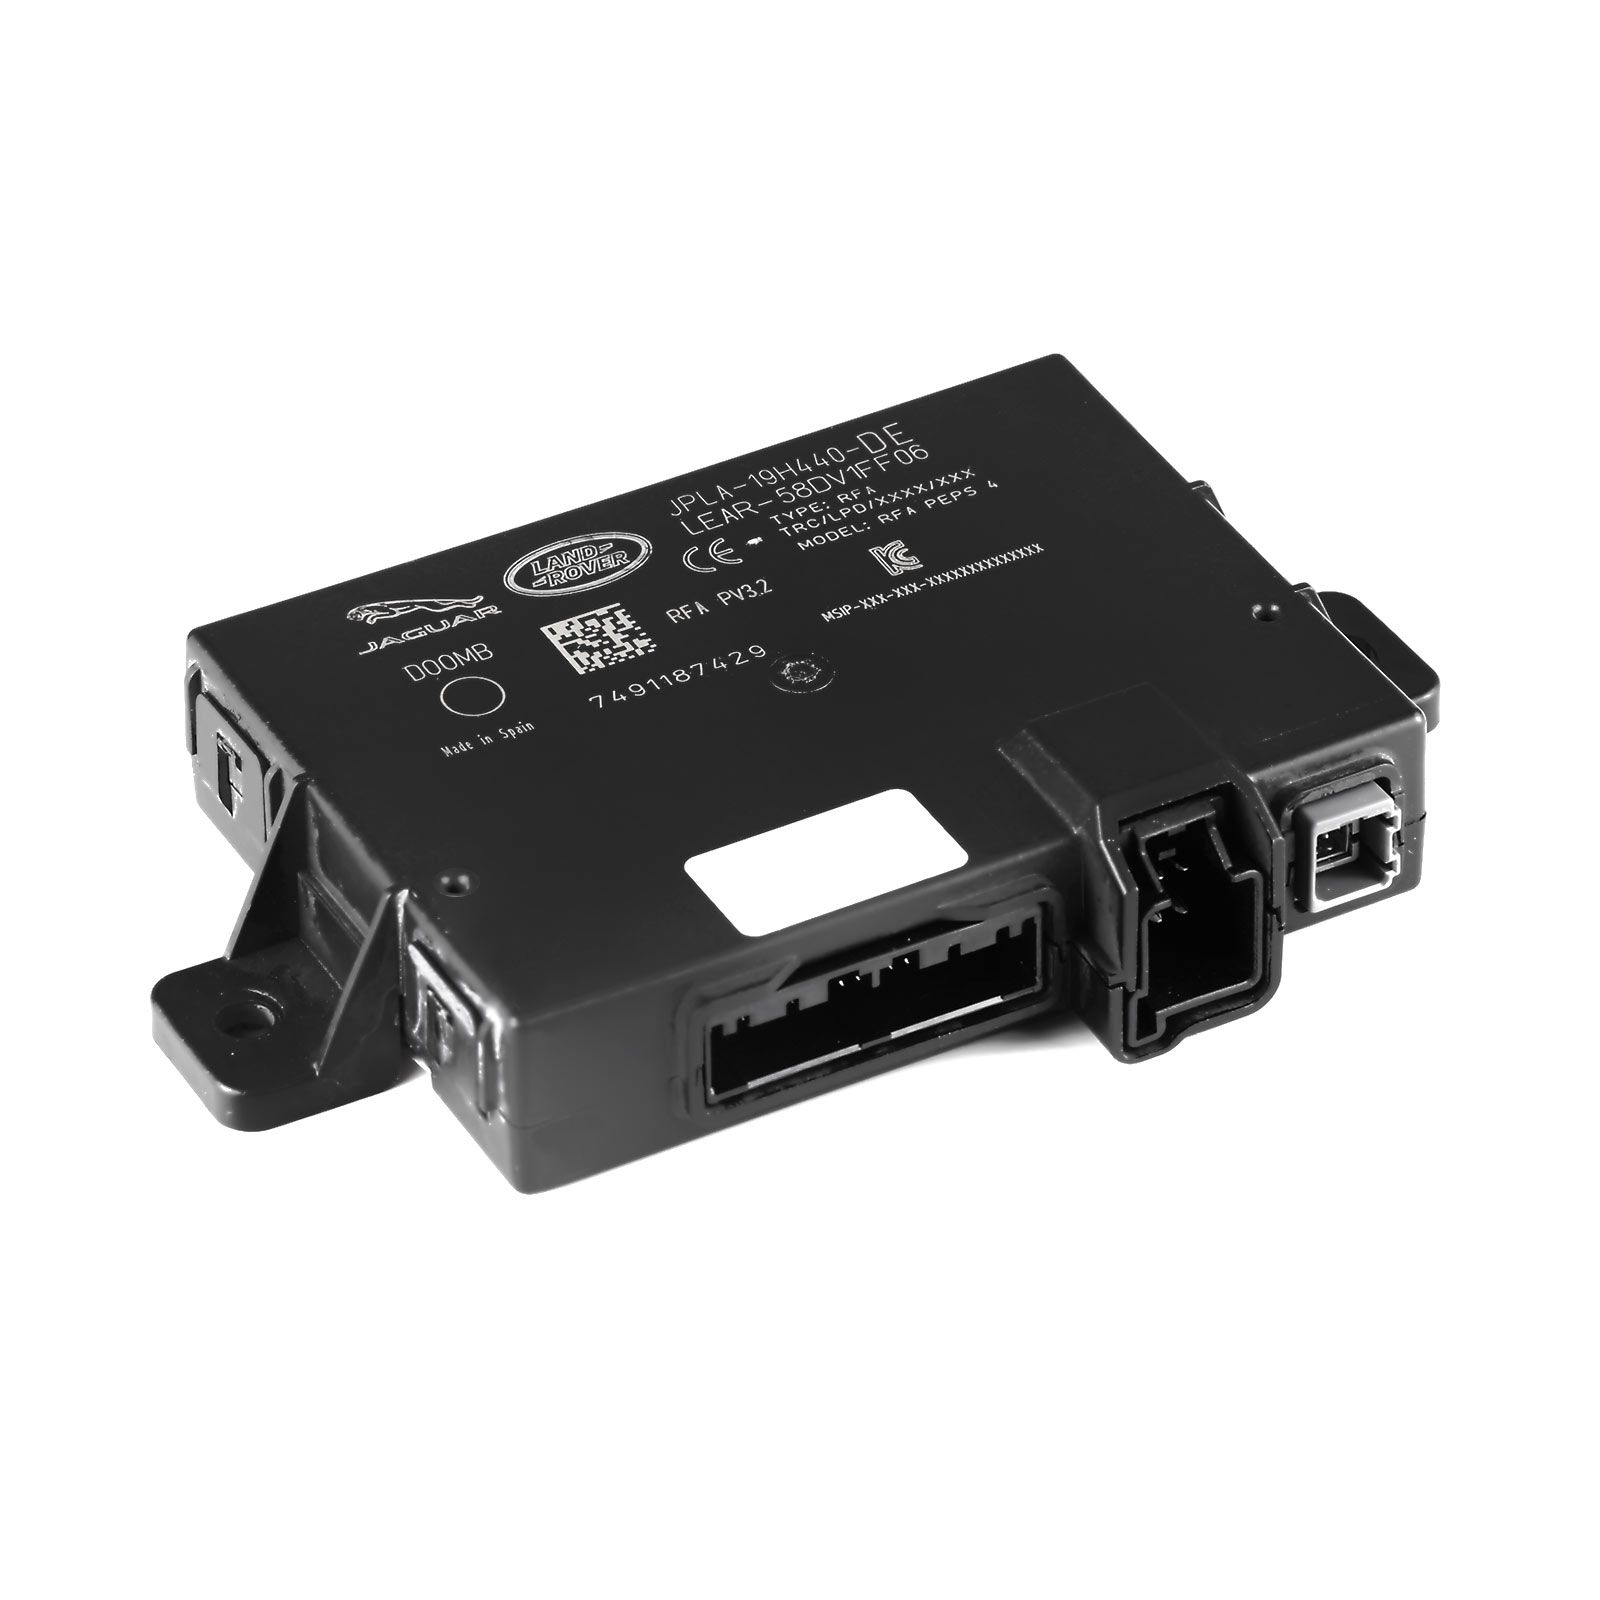 OEM Jaguar Land Rover Keyless Entry Control Module RFA Module JPLA with Comfort Access contains SPC560B Chip and Data